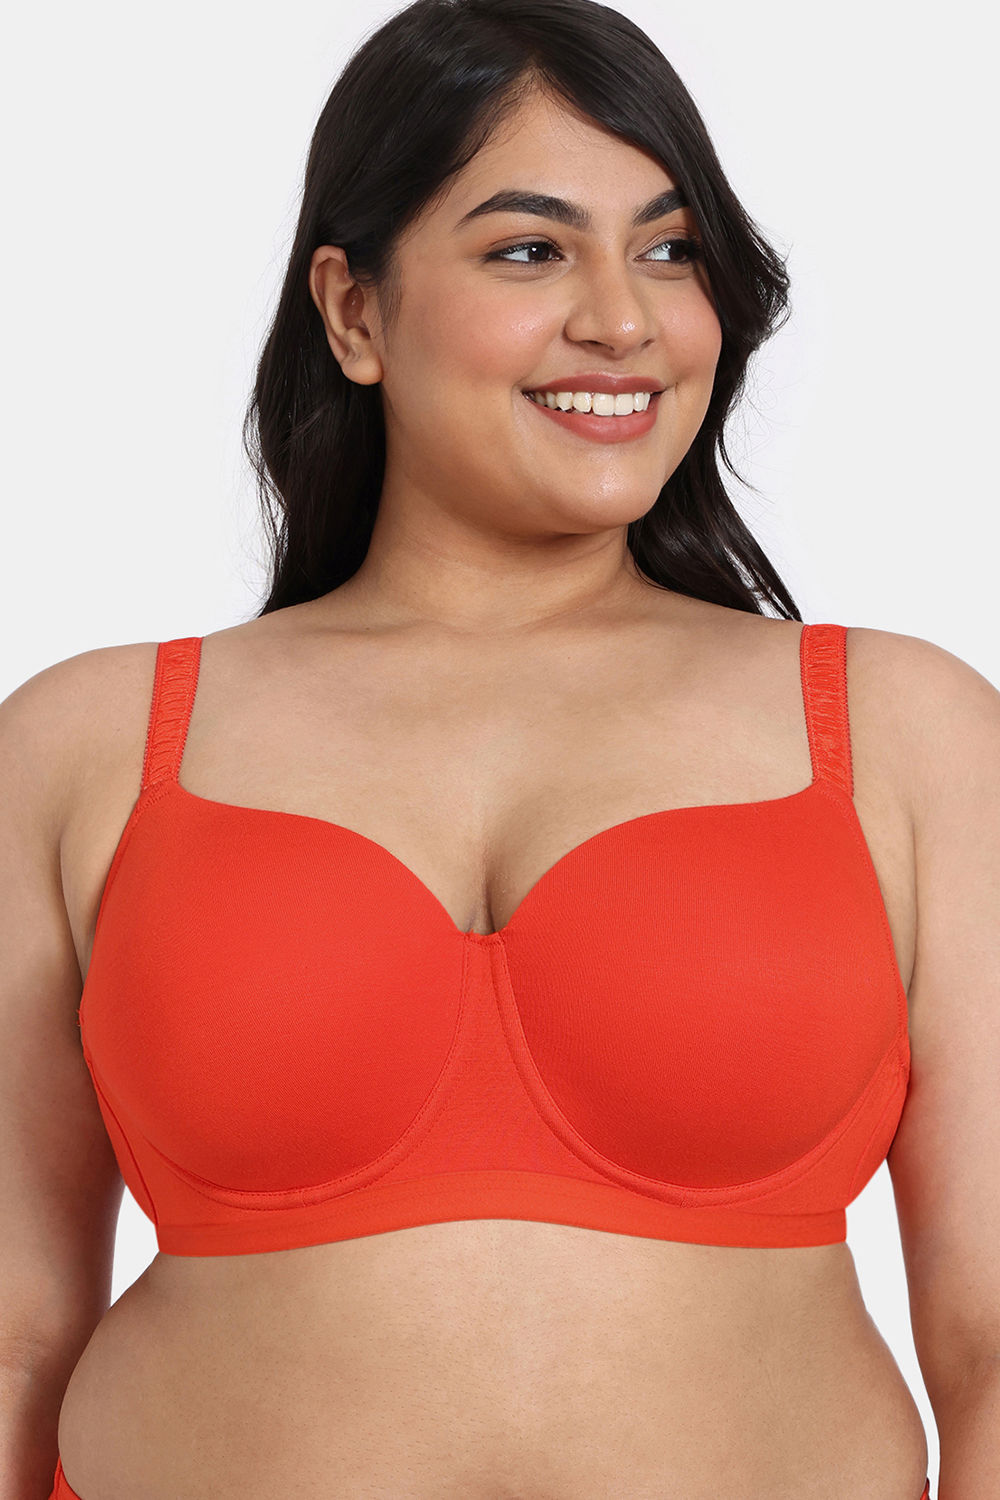 https://cdn.zivame.com/ik-seo/media/catalog/product/2/_/2_47_24/zivame-true-curv-natural-collective-padded-wired-3-4th-coverage-super-support-bra-with-hipster-panty-grenadine.jpg